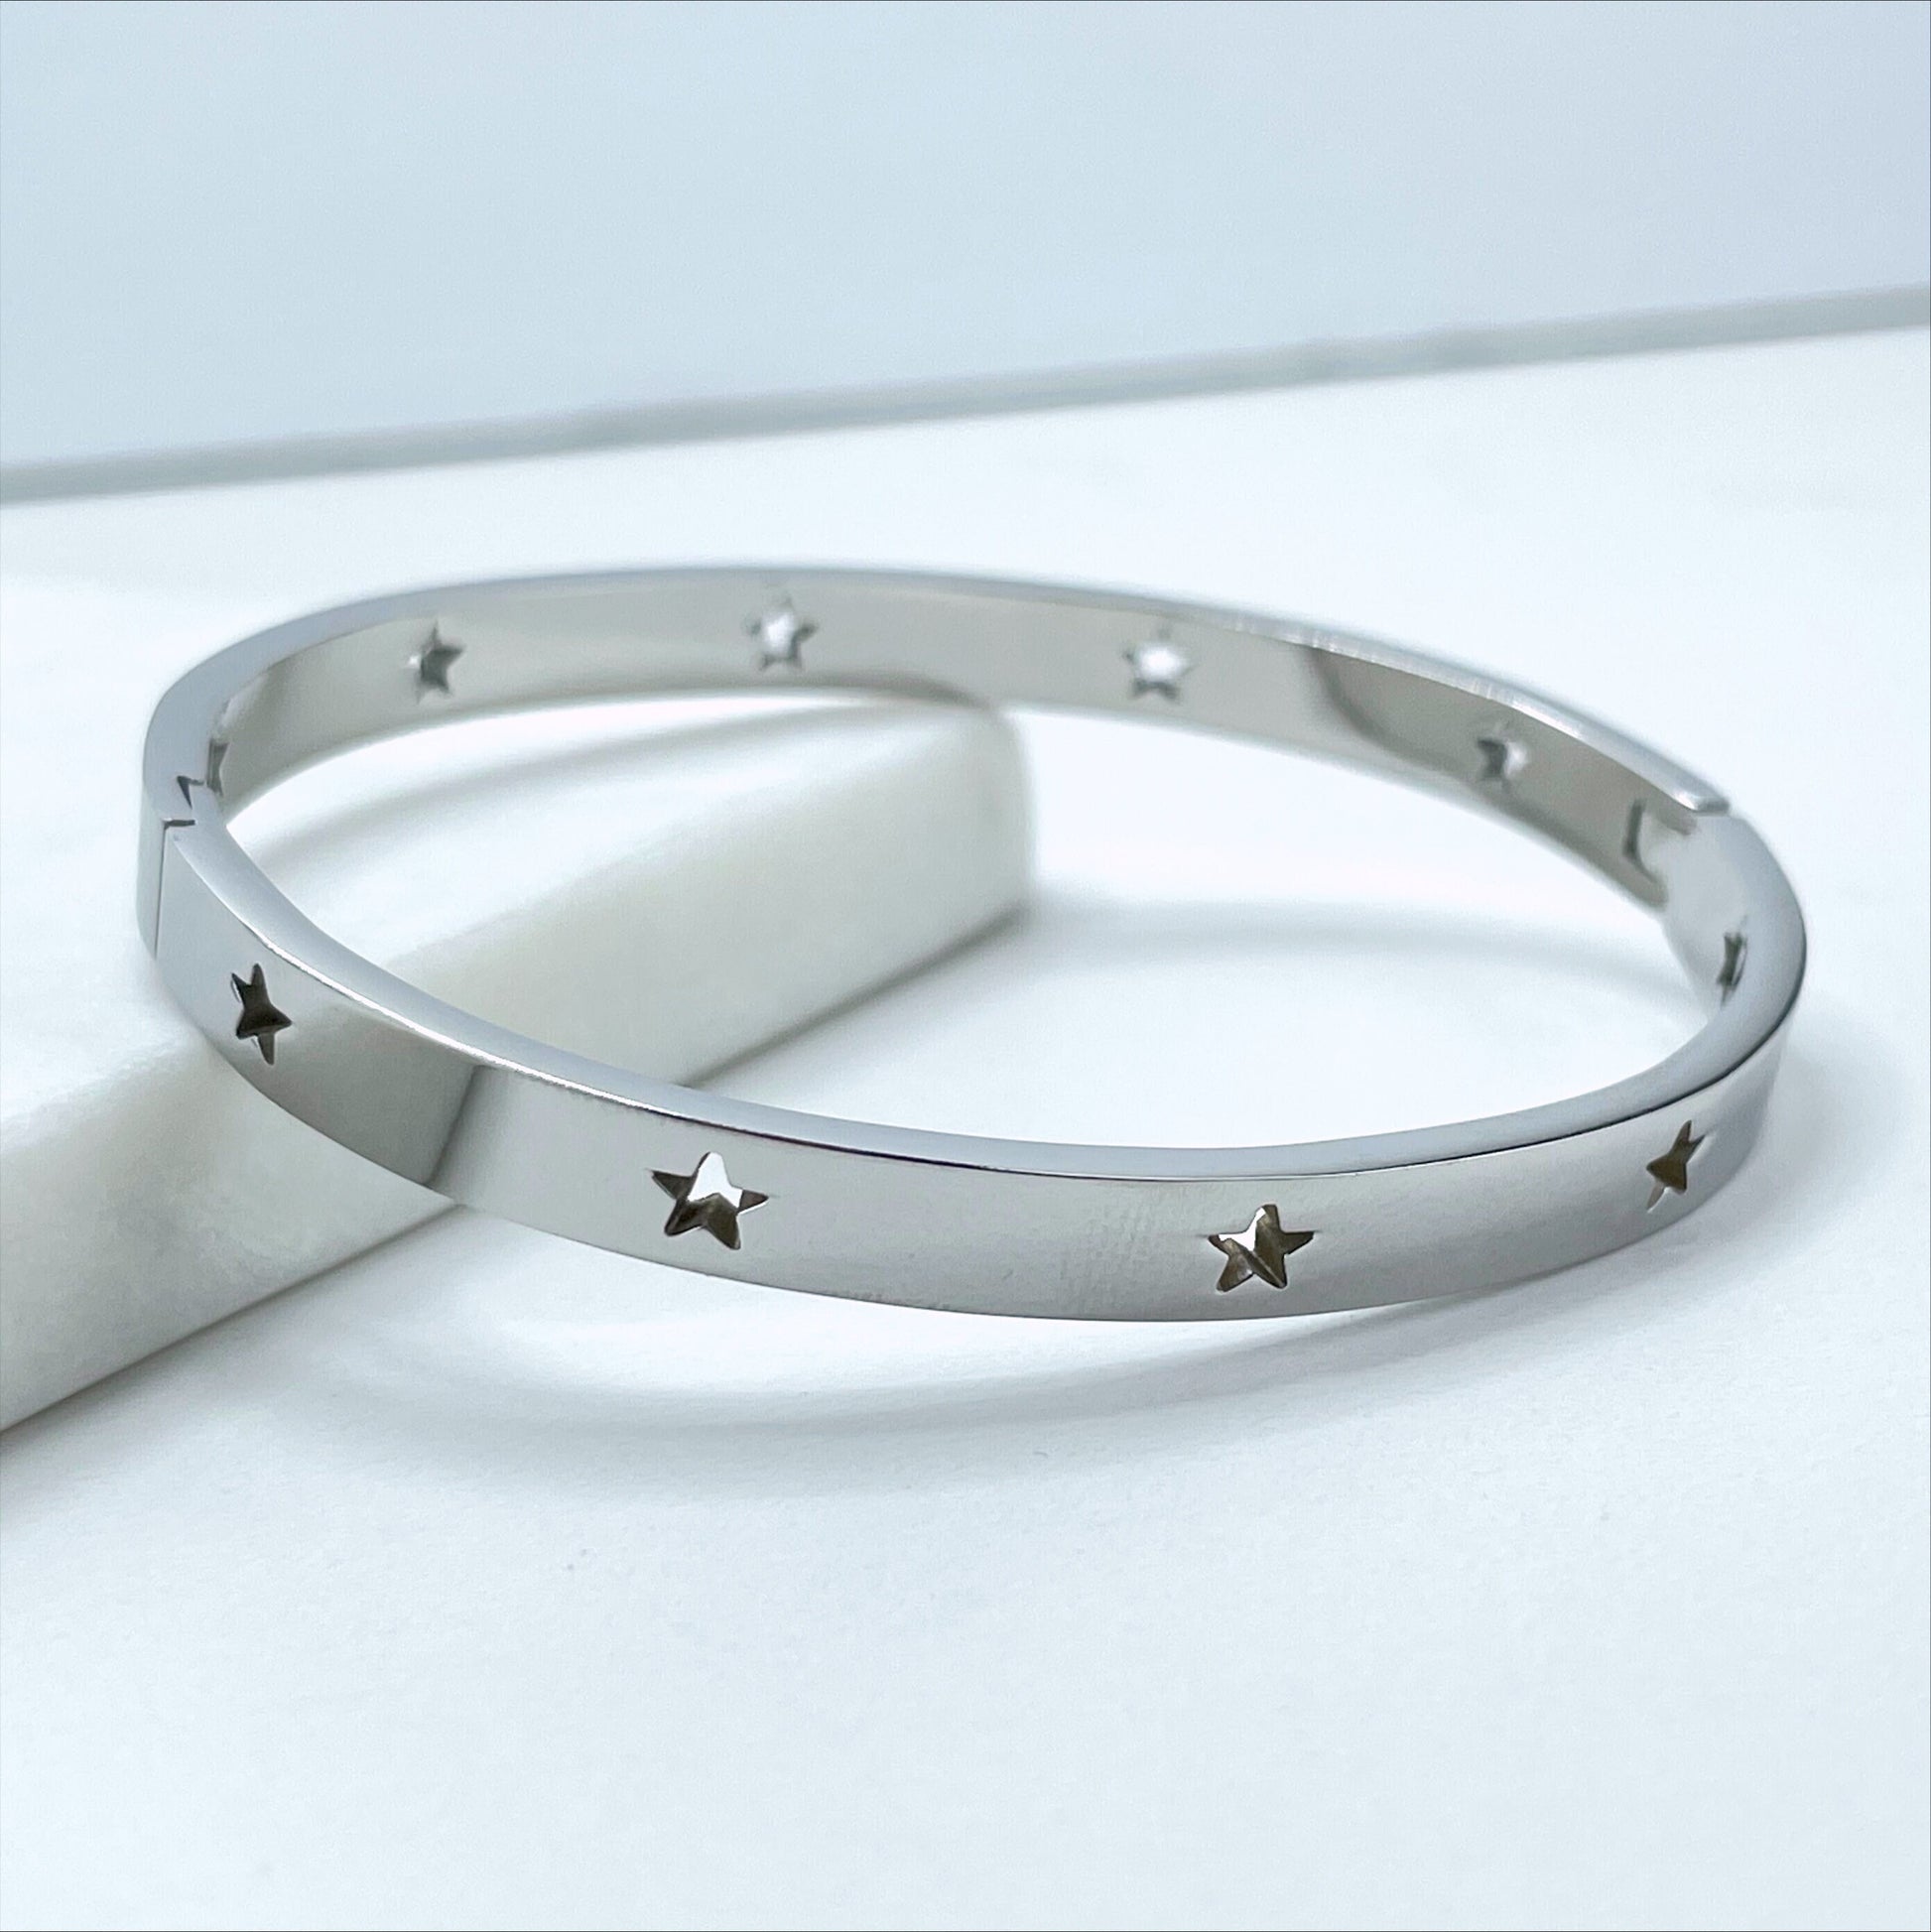 Silver Filled Trendy Star Bangle Bracelet Hinged Closure Wholesale Jewelry Supplies